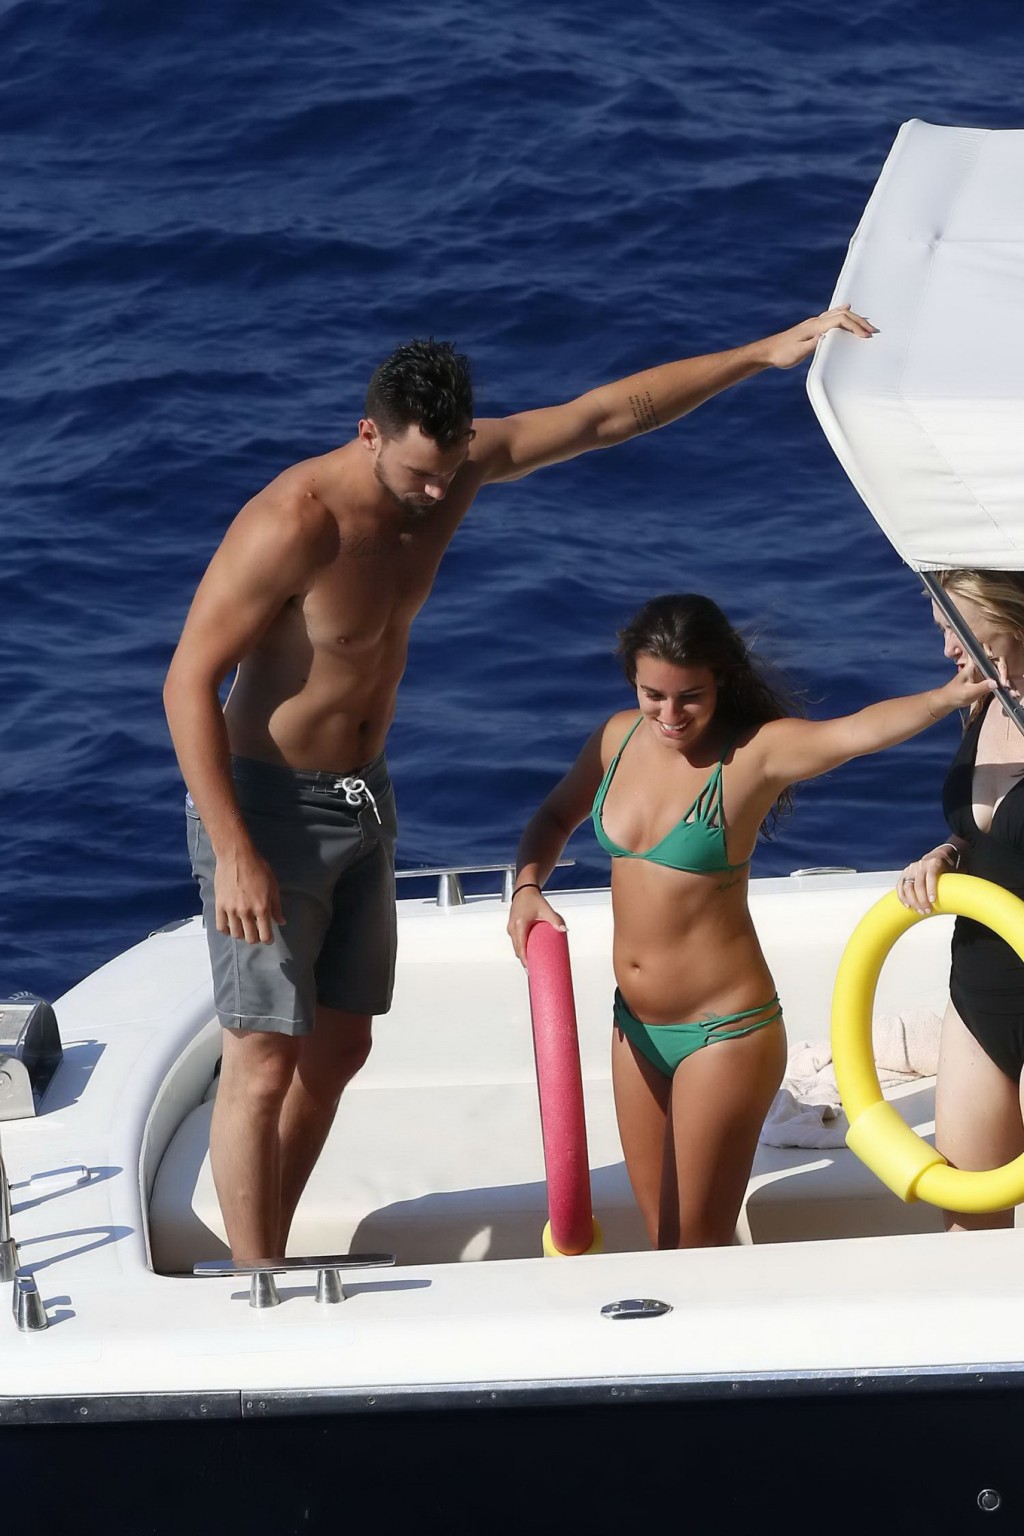 Lea Michele nipple slip from her tiny green bikini on the boat during a vacation #75189817